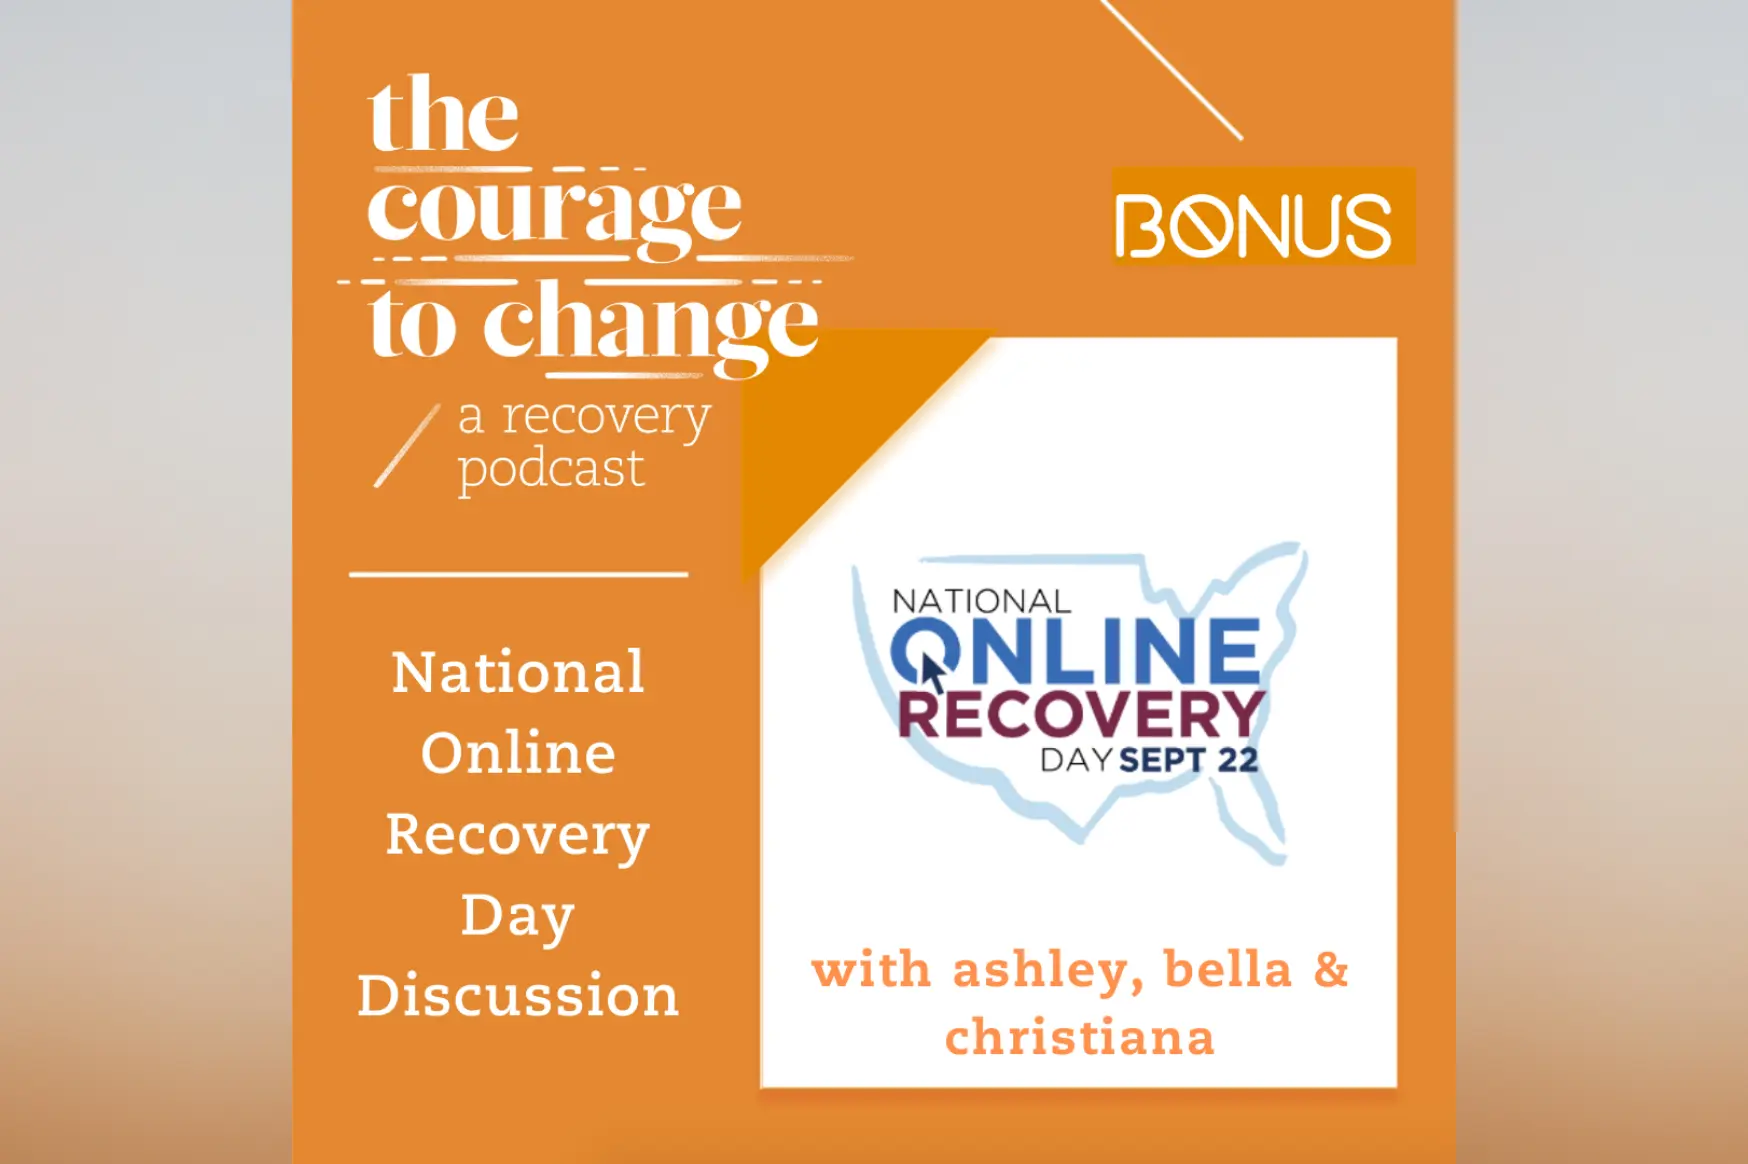 Bonus Episode - National Online Recovery Day